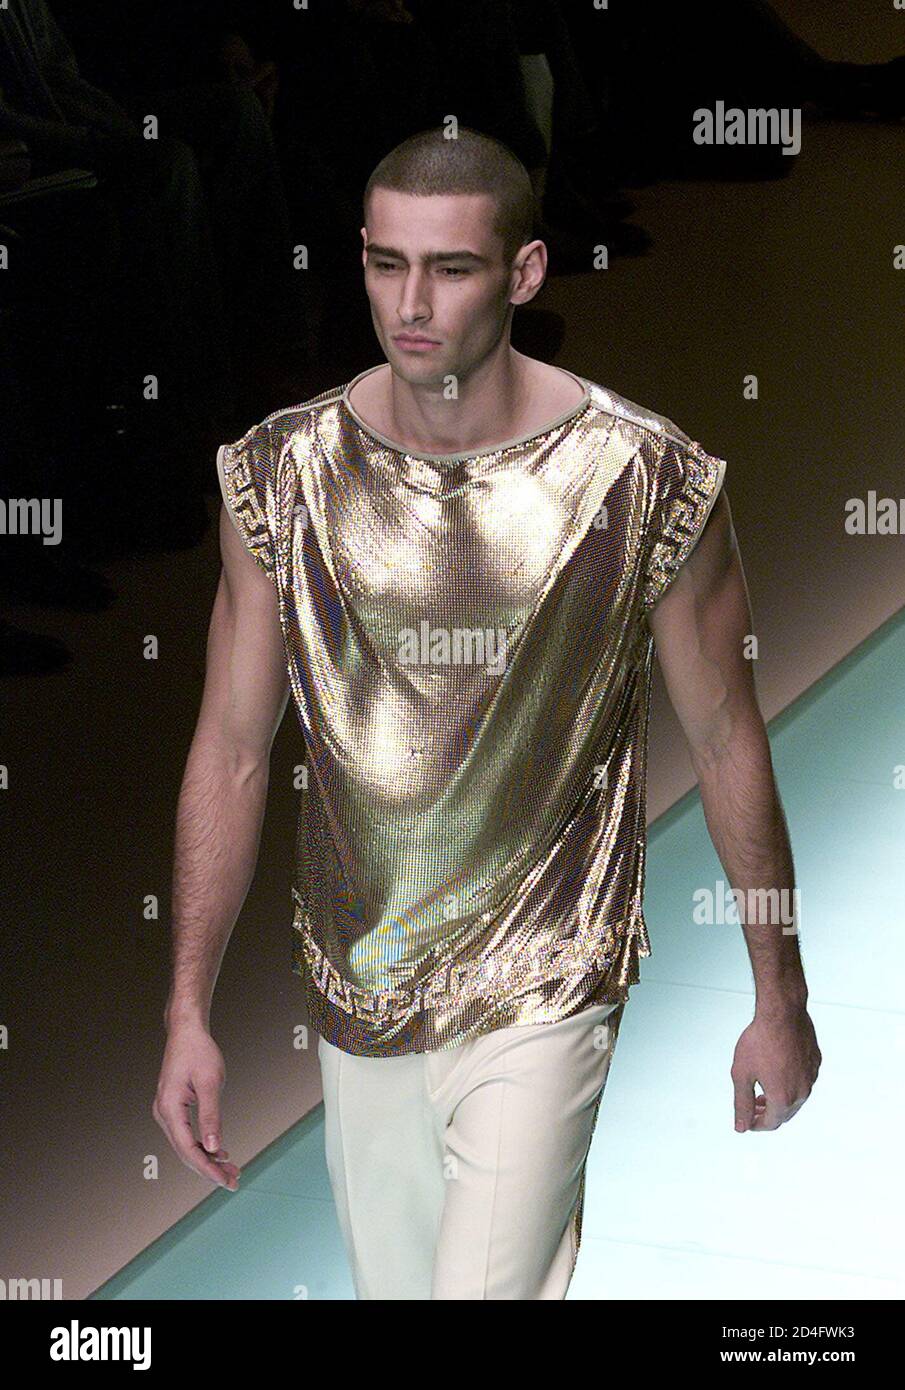 A model wears a short-sleeves shirt as part of Gianni Versace Autumn/Winter  ready-to-